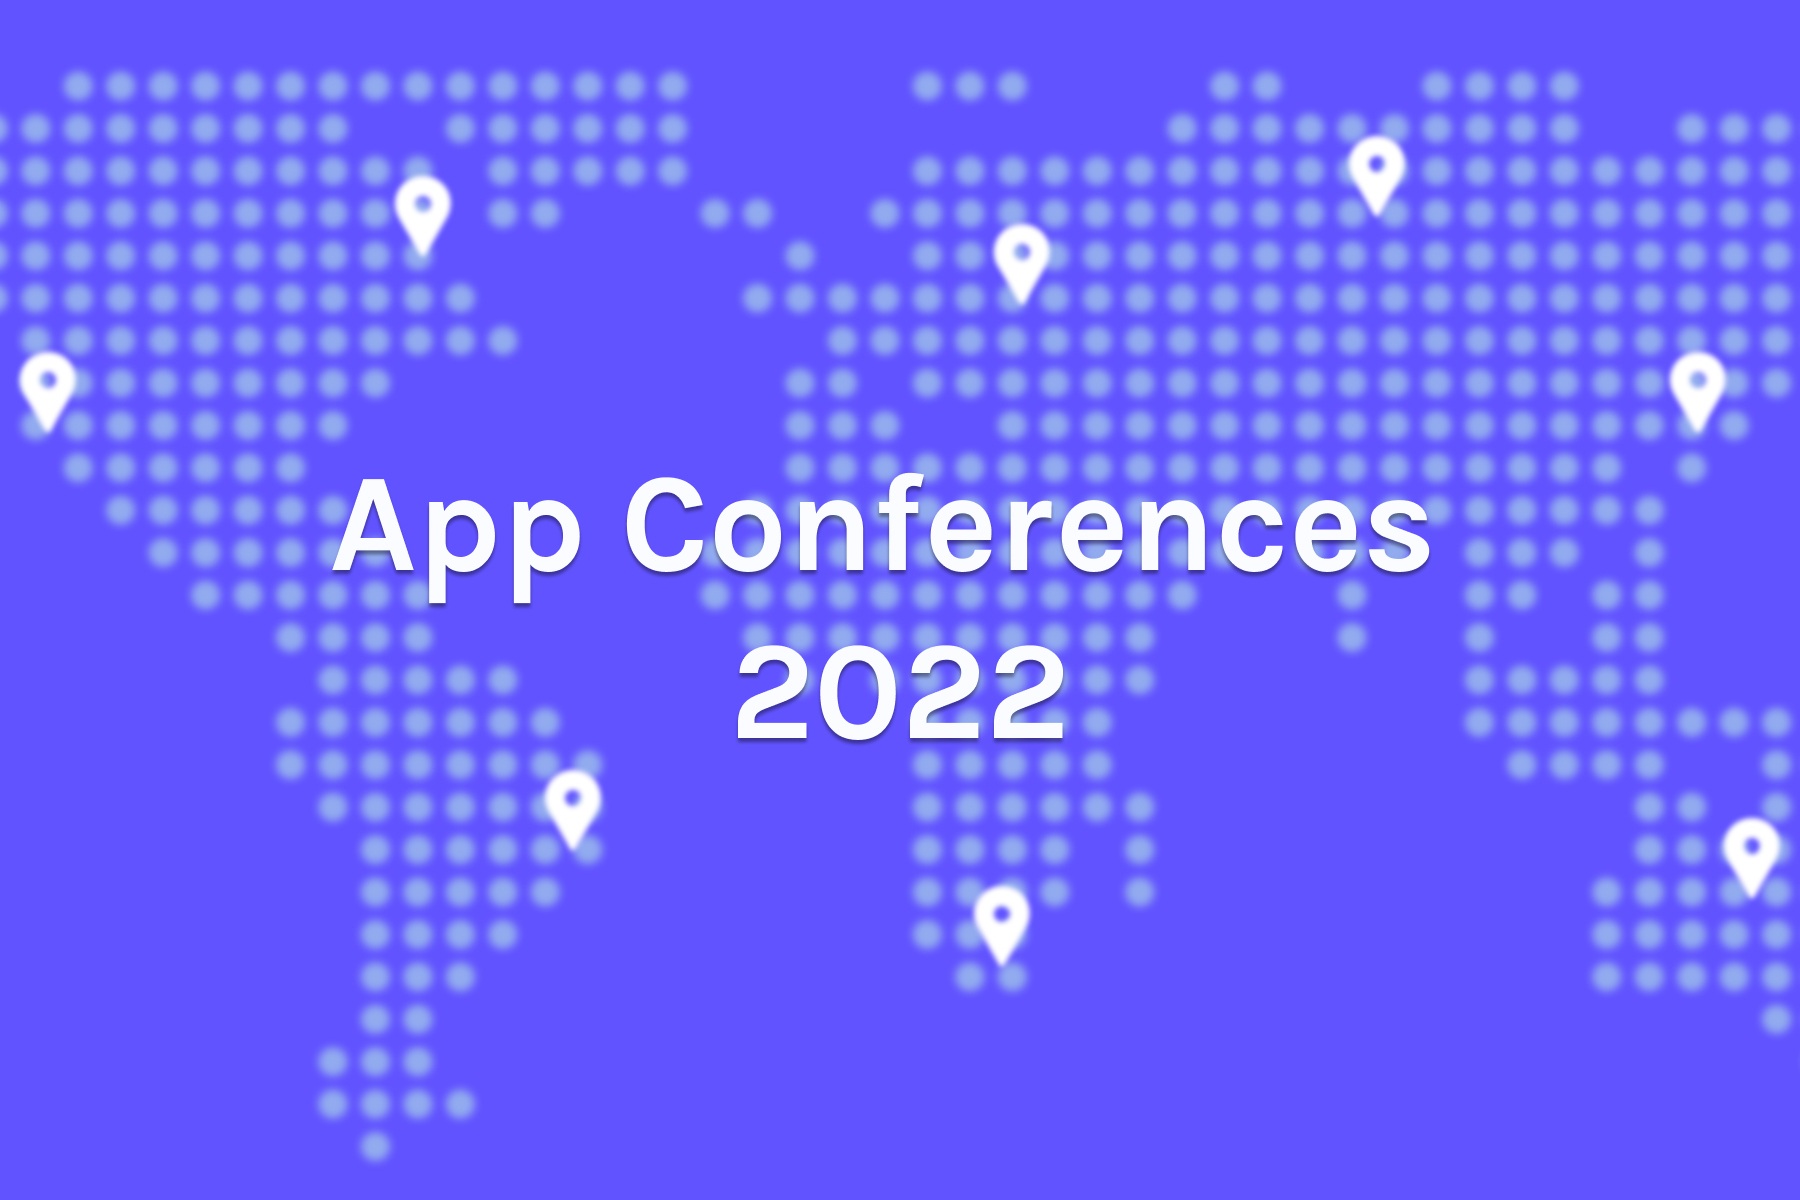 42 Mobile App Conferences in 2022 Full List with Prices